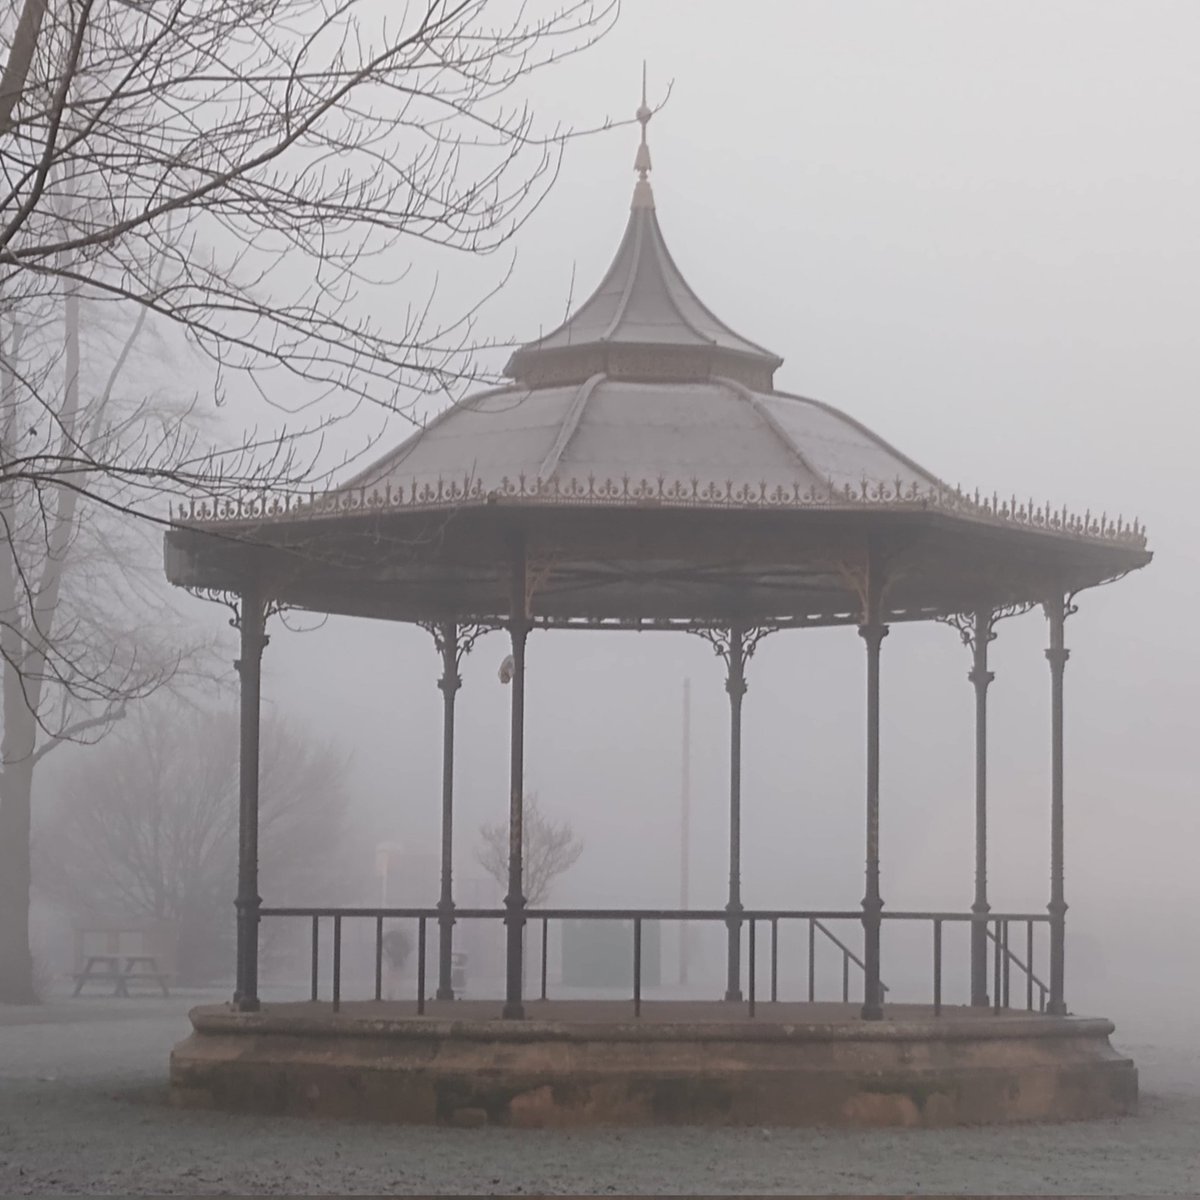 A cold 🥶 frosty ❄️ foggy 🌫️ morning in West Park , Long Eaton.
But I see beauty in these conditions 😊 @LongEatonLife @promderby2 #longeaton #DERBYSHIRE #NOTTINGHAM #erewash #winter #fog #frost #bandstand